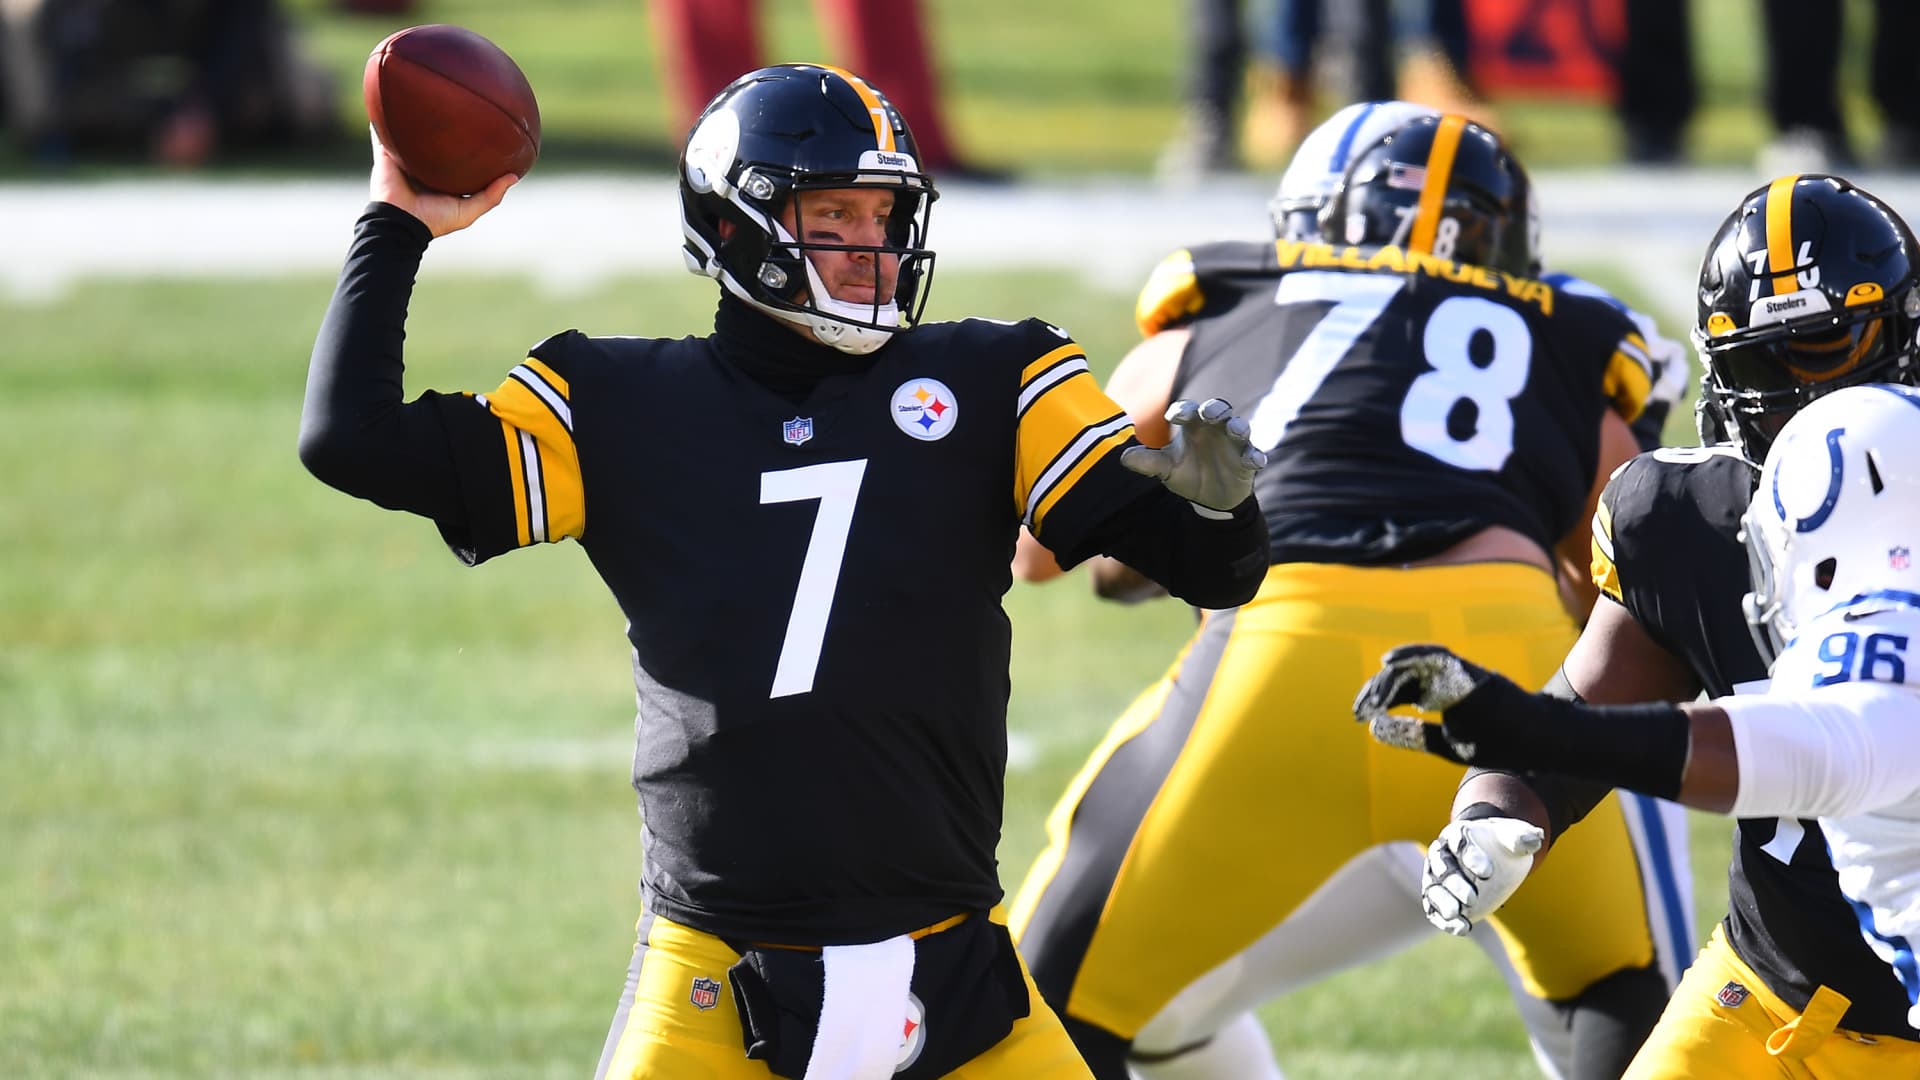 Quarterback Ben Roethlisberger #7 of the Pittsburgh Steelers passes the ball in the first quarter of the game against the Indianapolis Colts at Heinz Field on December 27, 2020 in Pittsburgh, Pennsylvania.